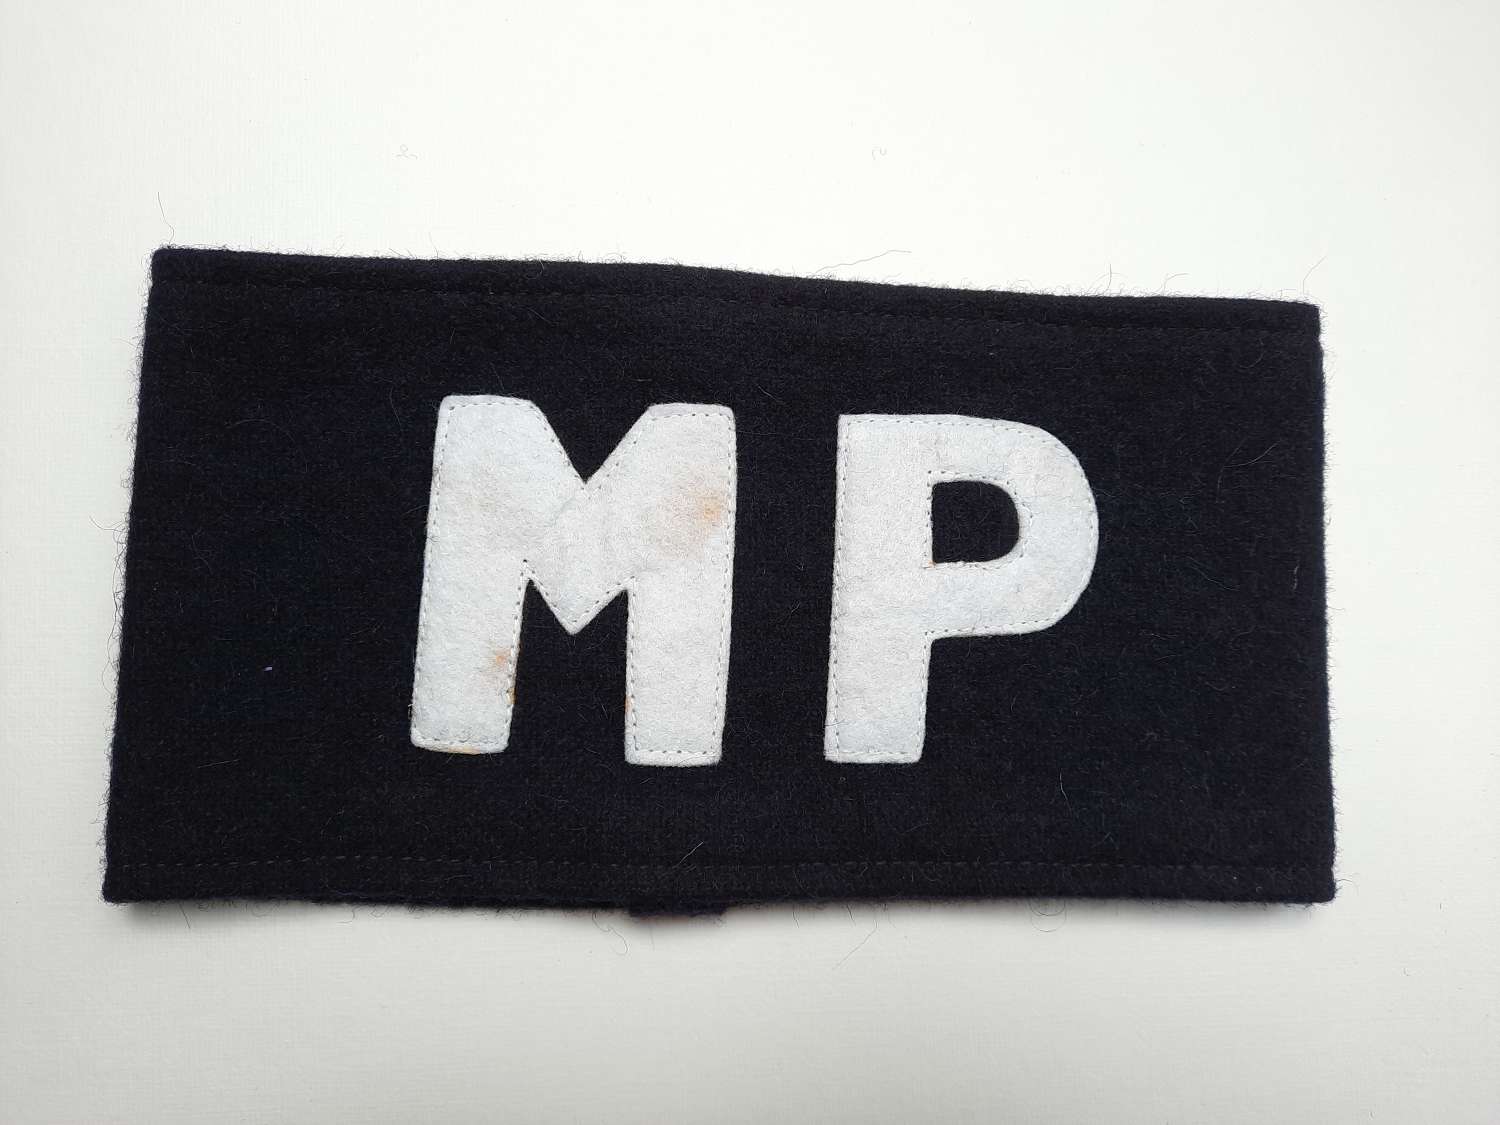 Reproduction US Army Military Police Armband